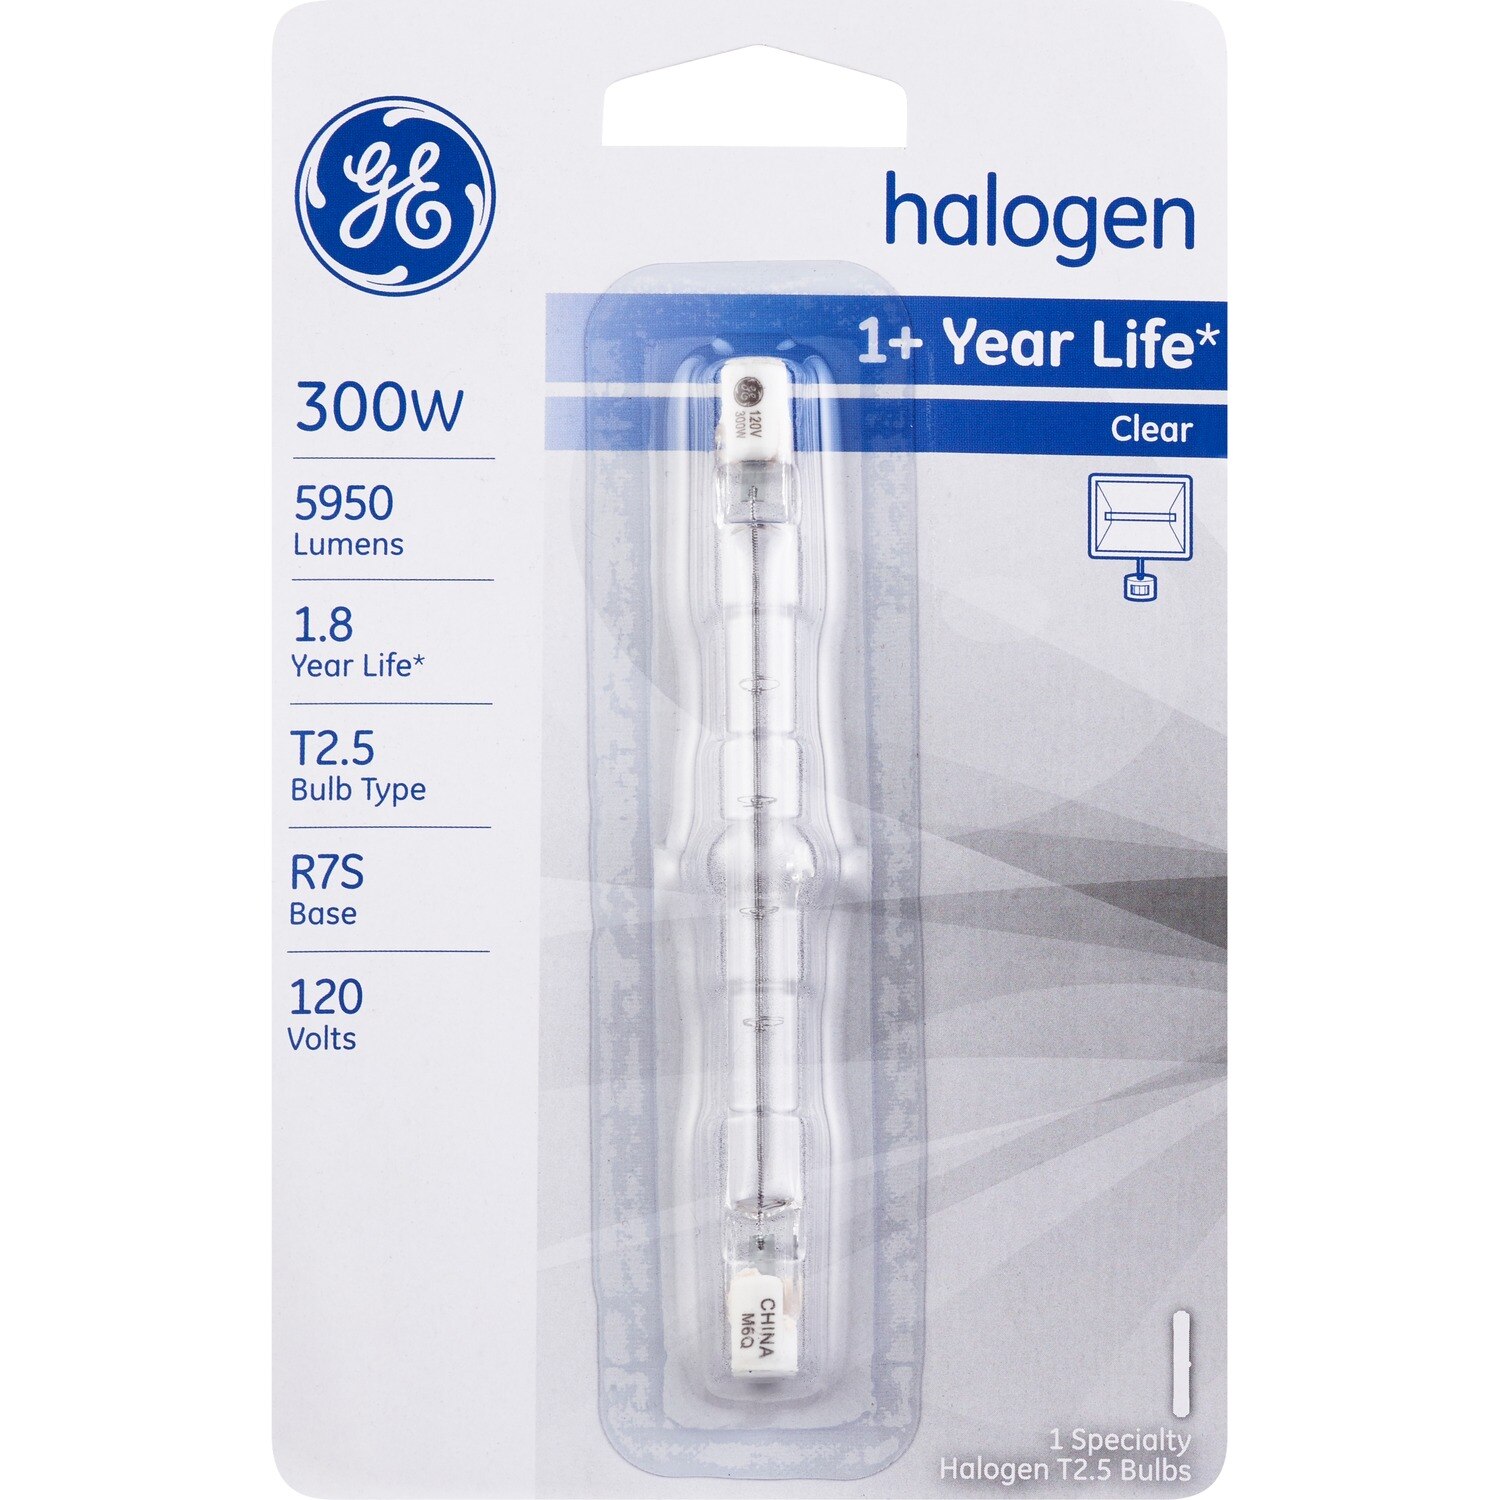 GE Halogen 300W Specialty Bulb, Clear